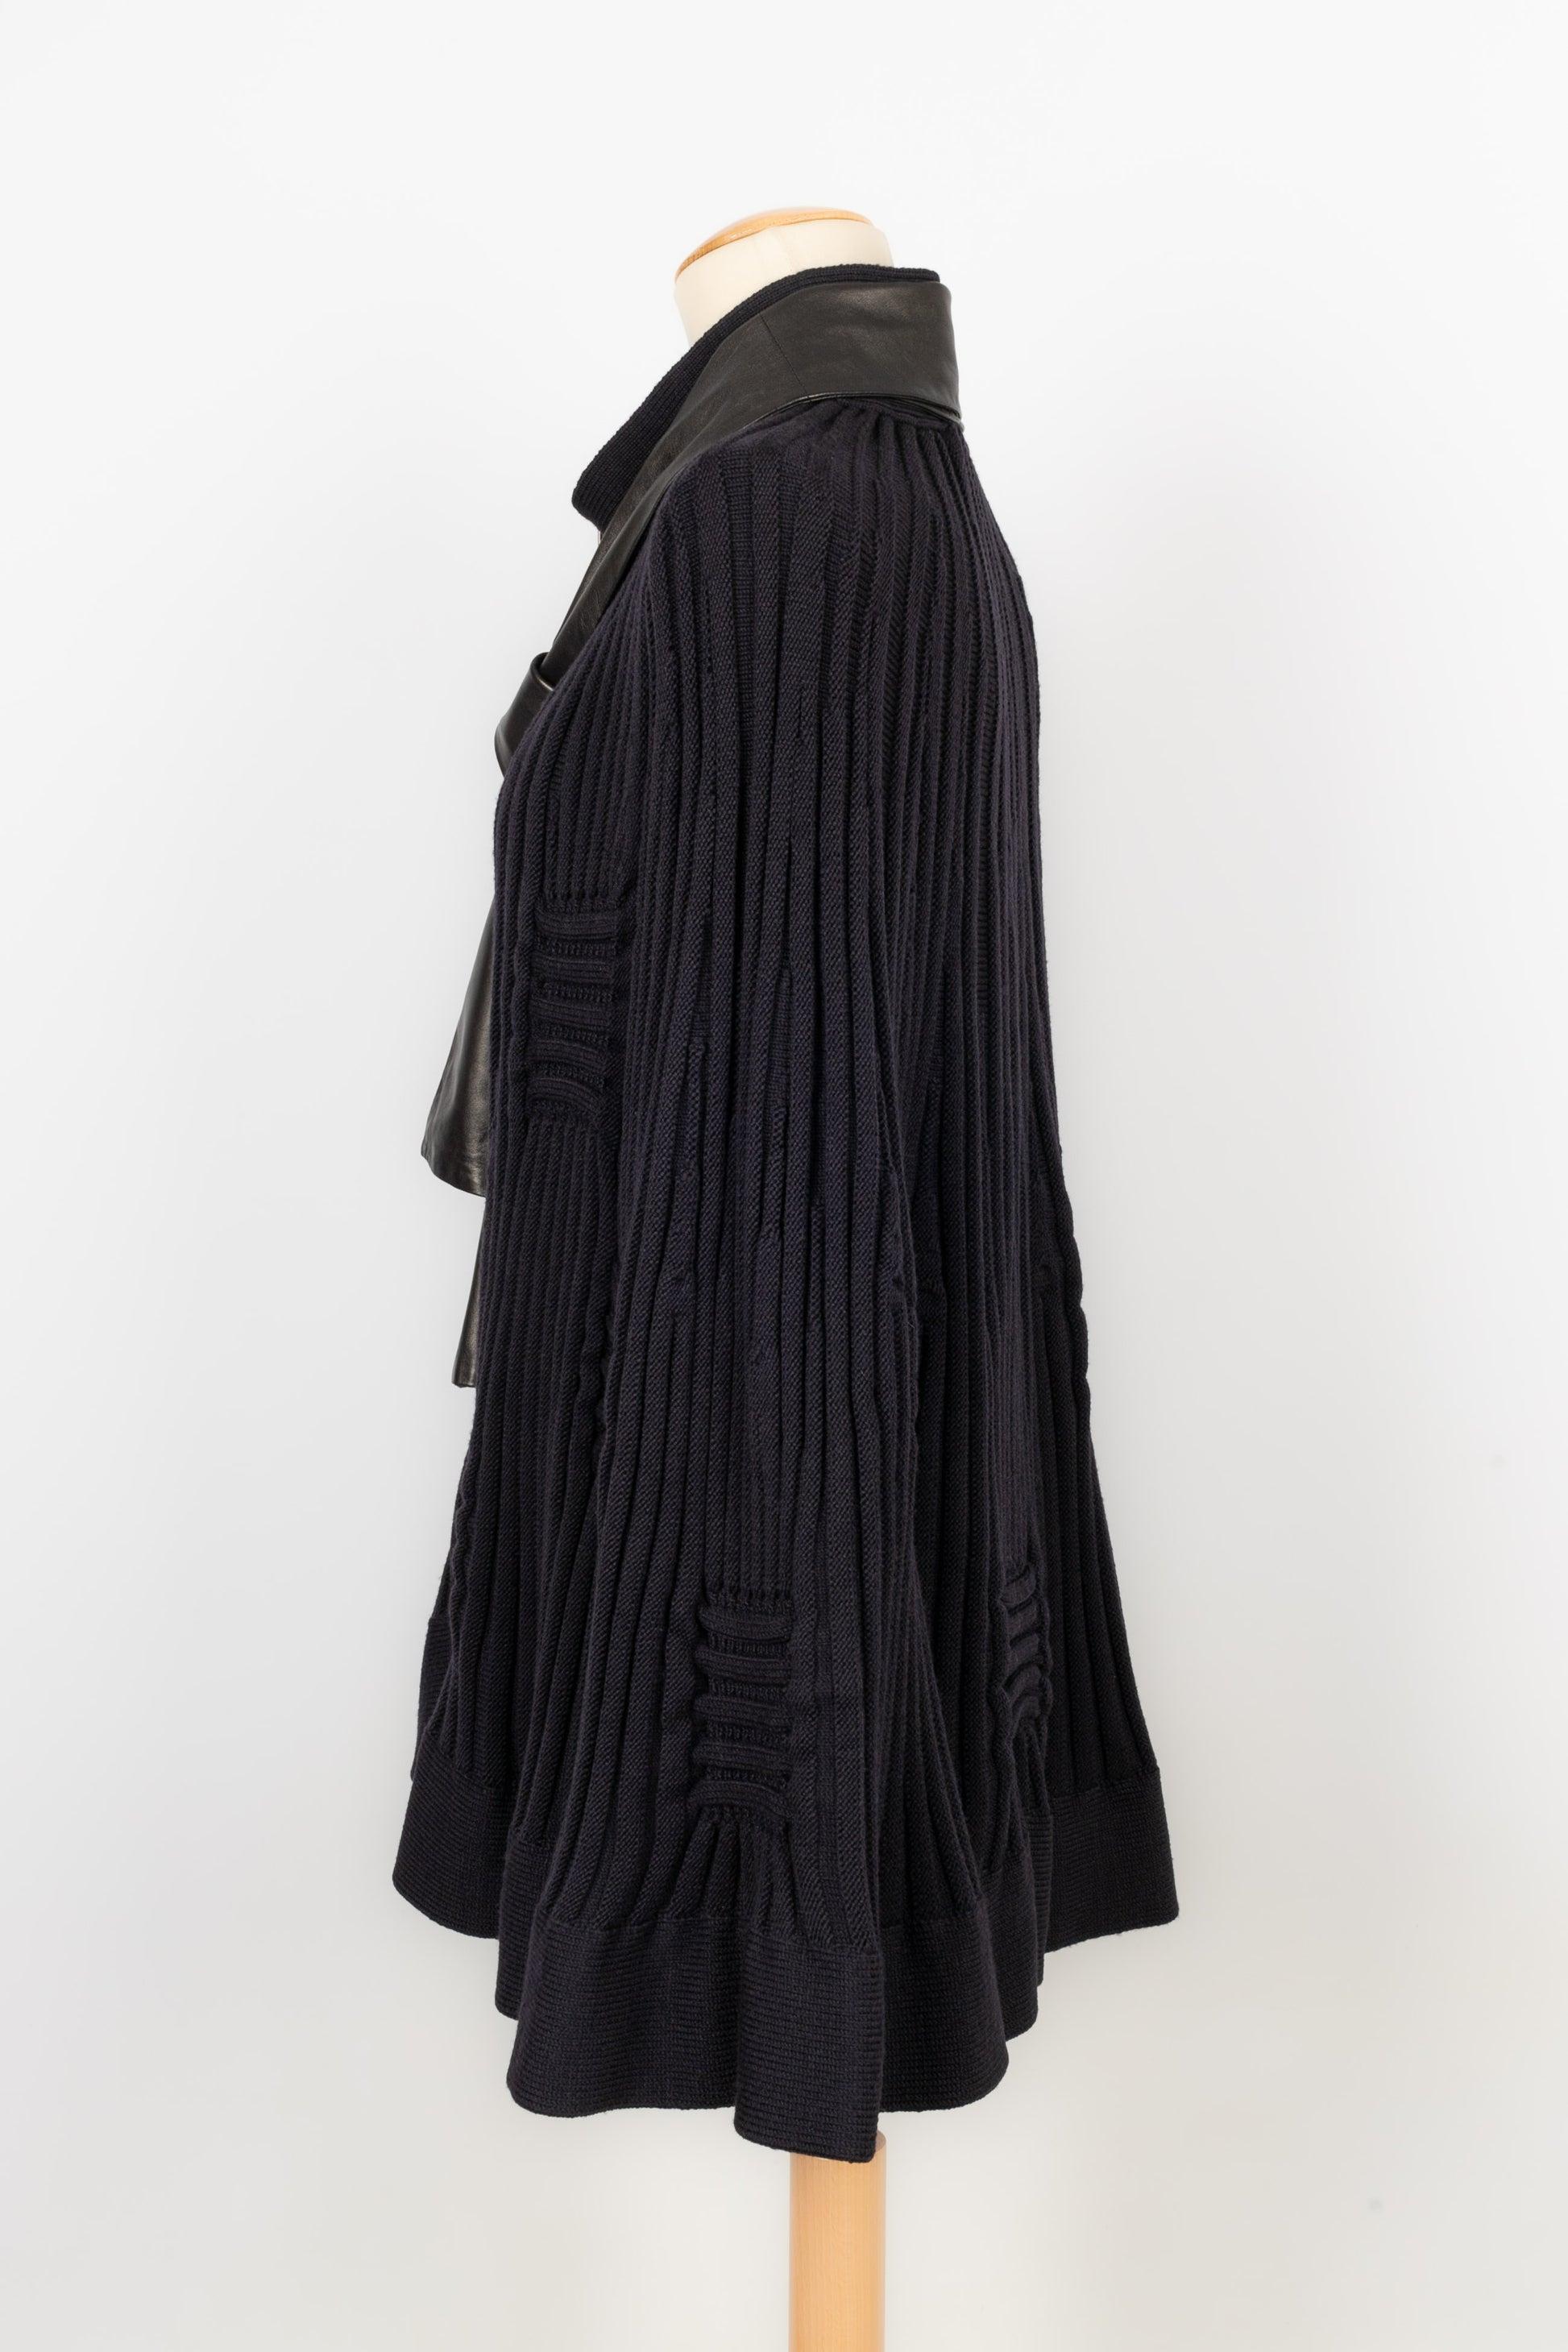 Women's Valentino Wool Cape with Black Leather Ascot Tie For Sale